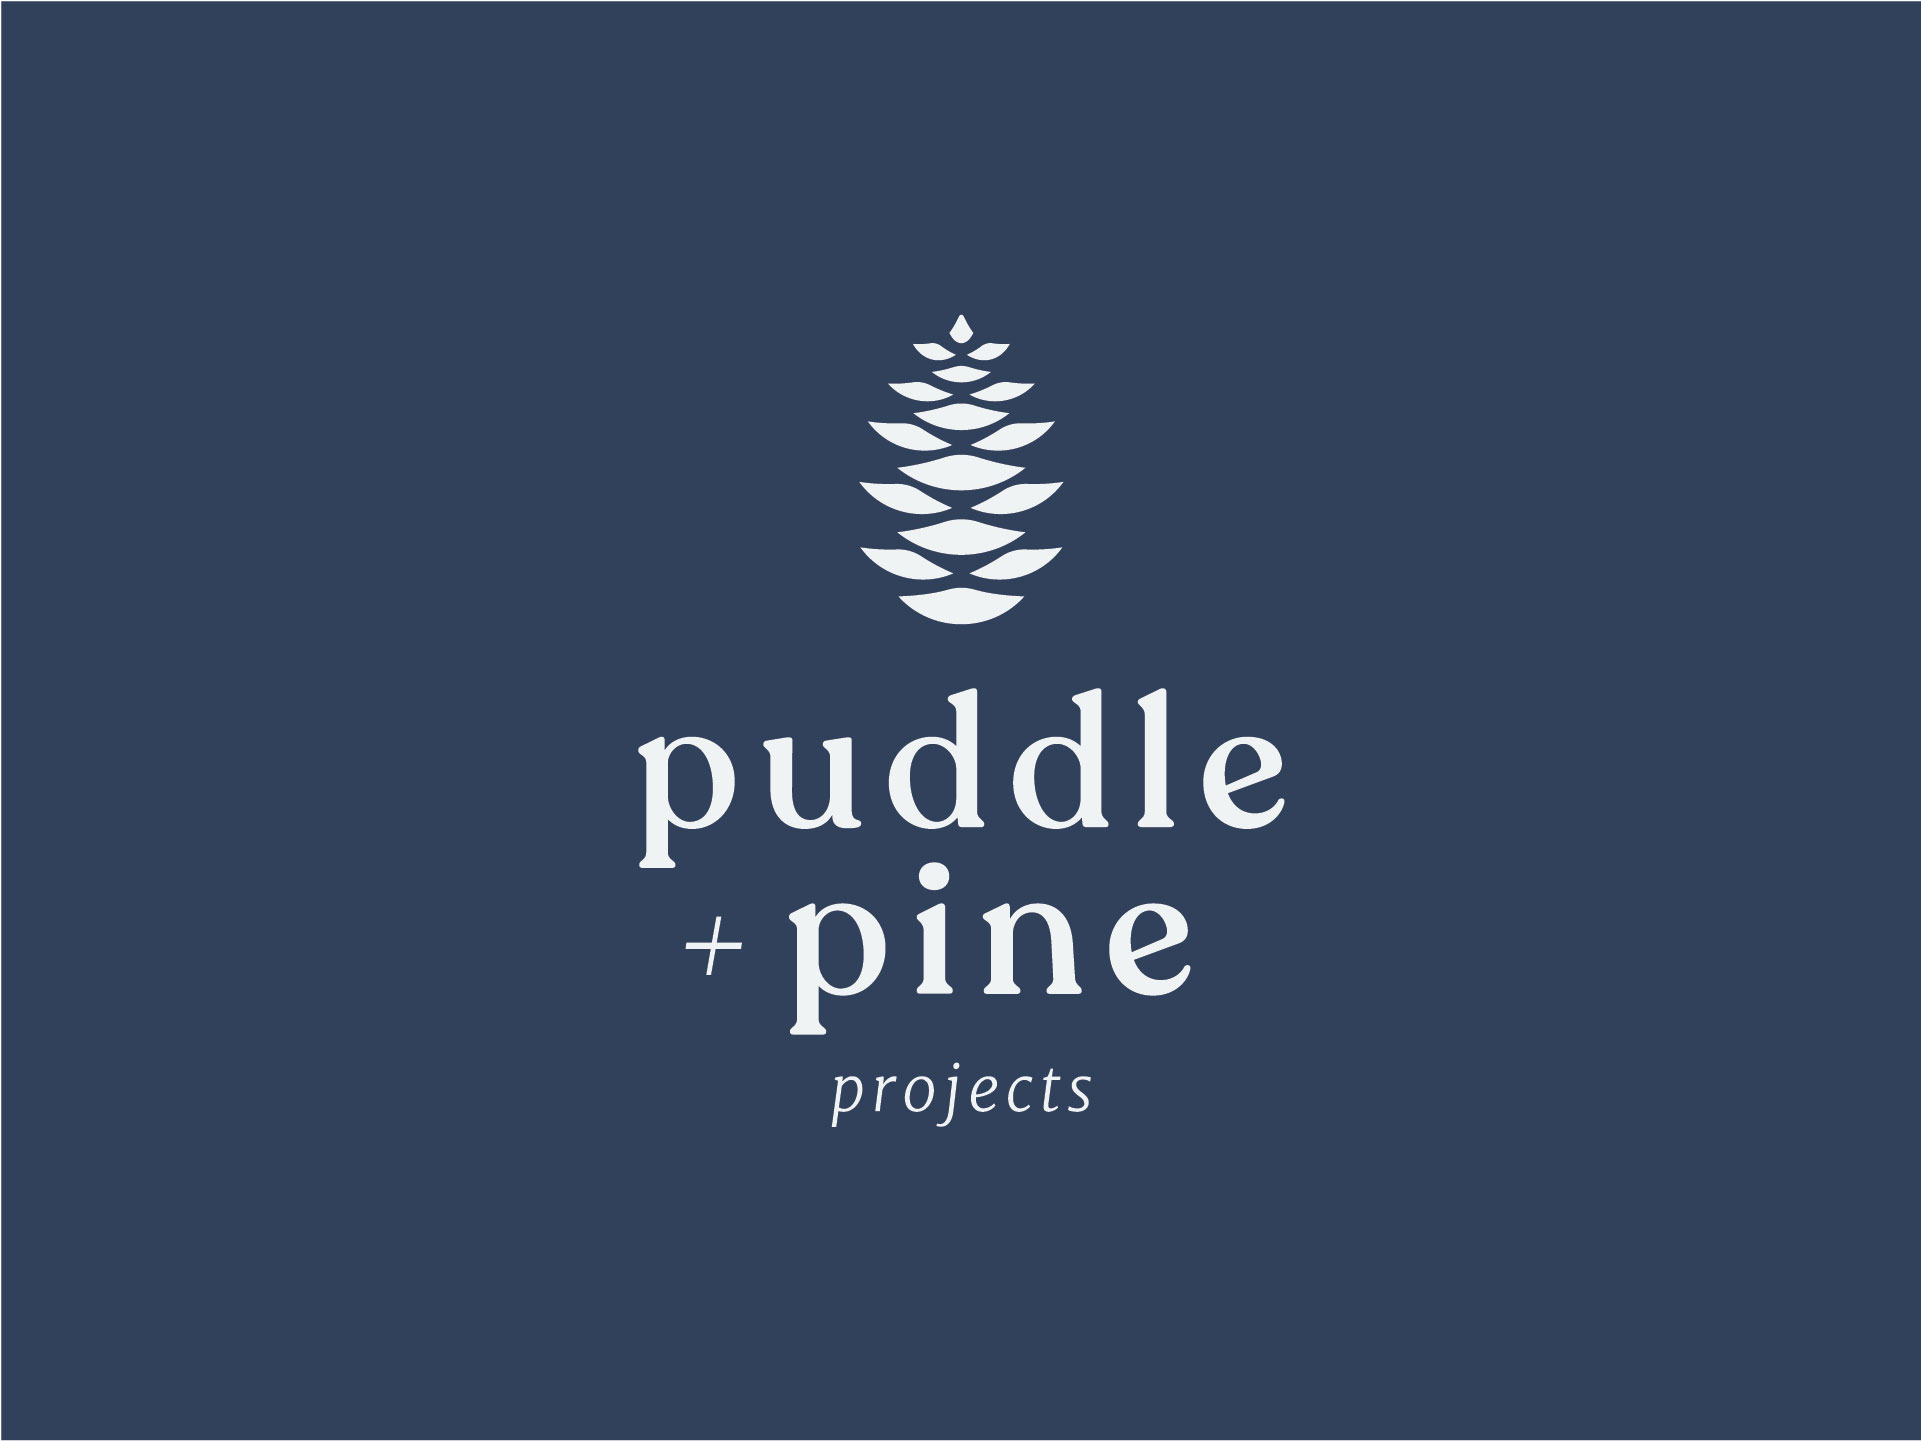 Puddle + Pine projects white logo - White Canvas Design